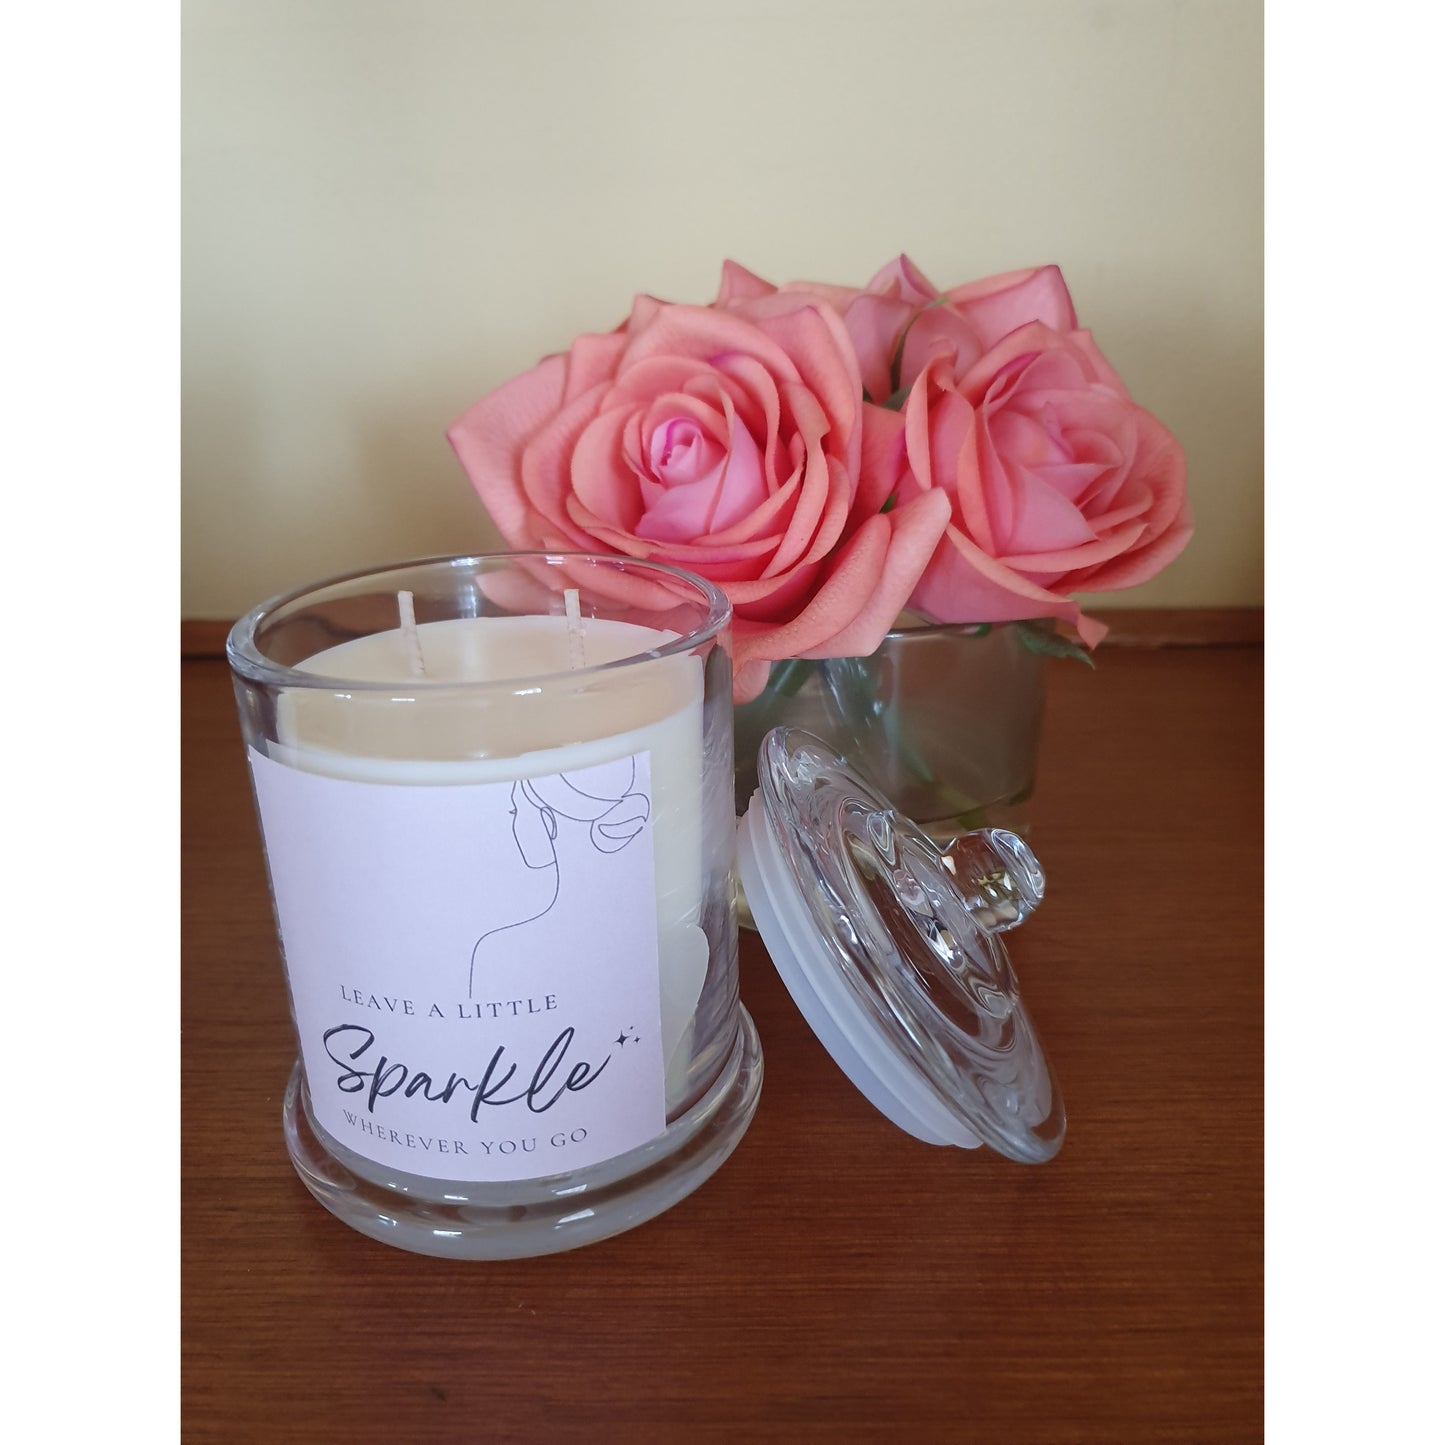 Inspirational Quote Candle-Leave a Little Sparkle Wherever You Go